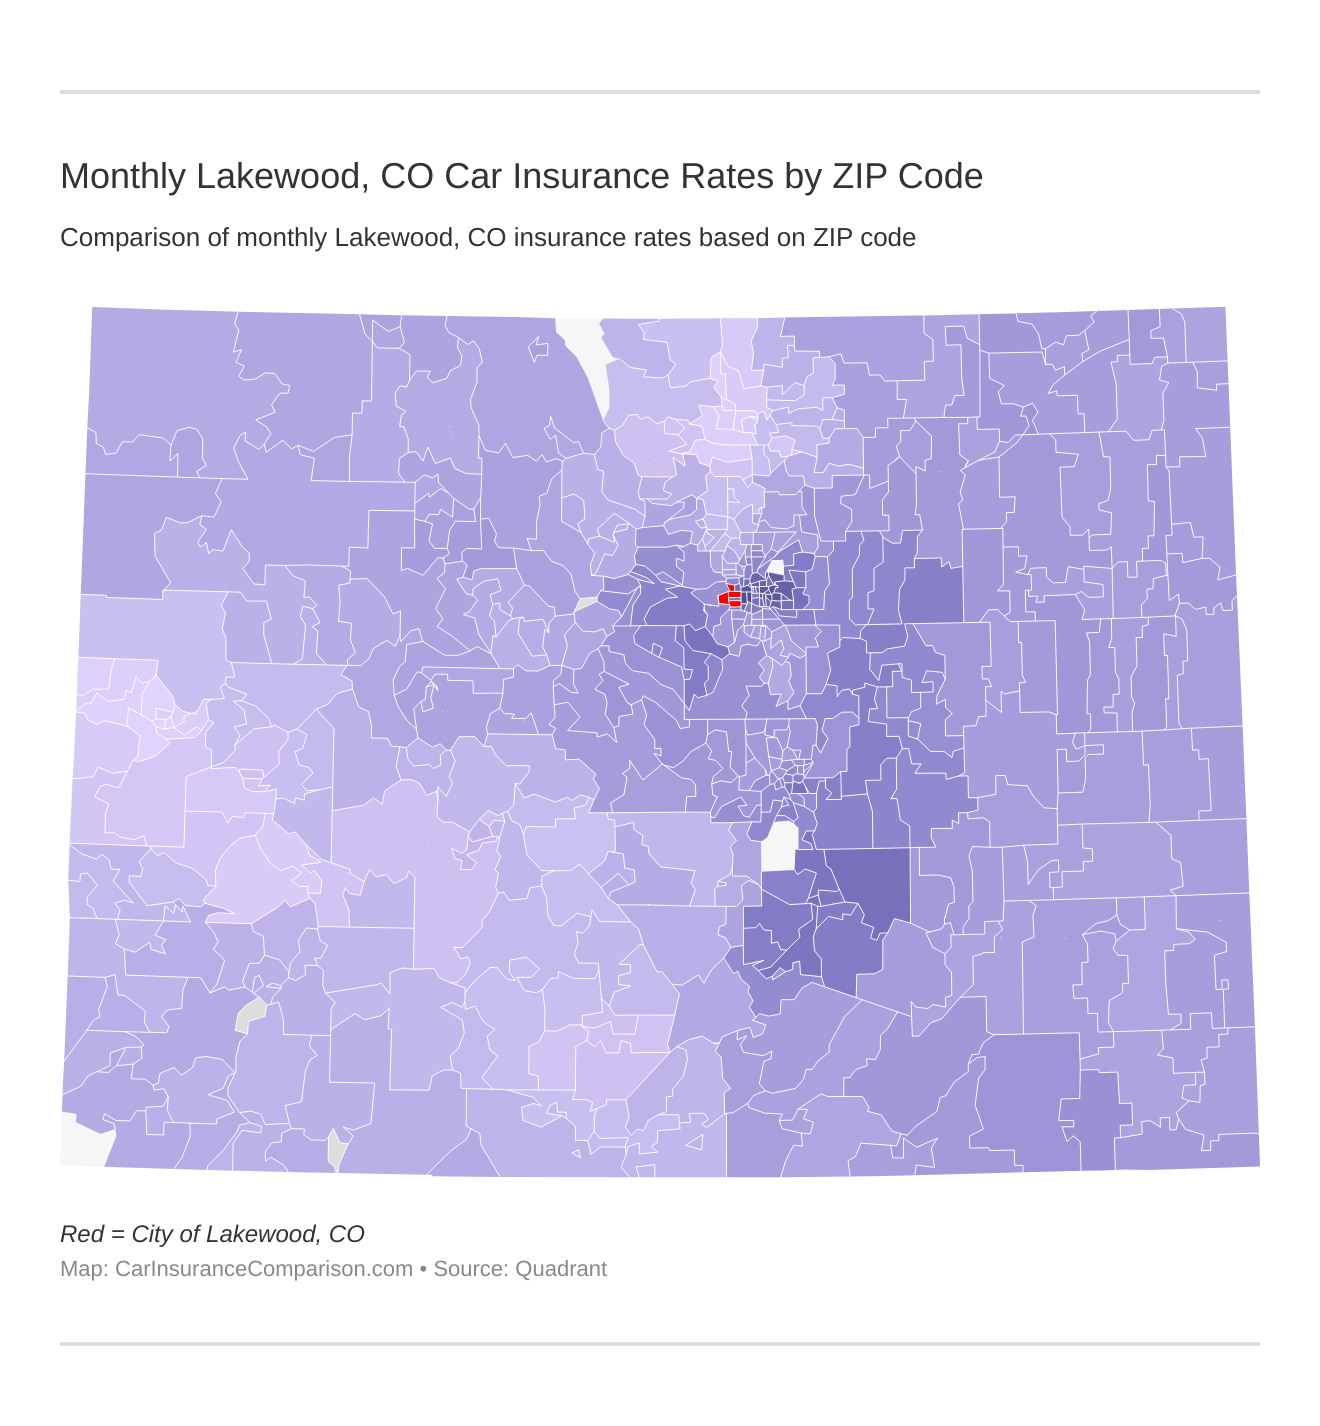 Monthly Lakewood, CO Car Insurance Rates by ZIP Code